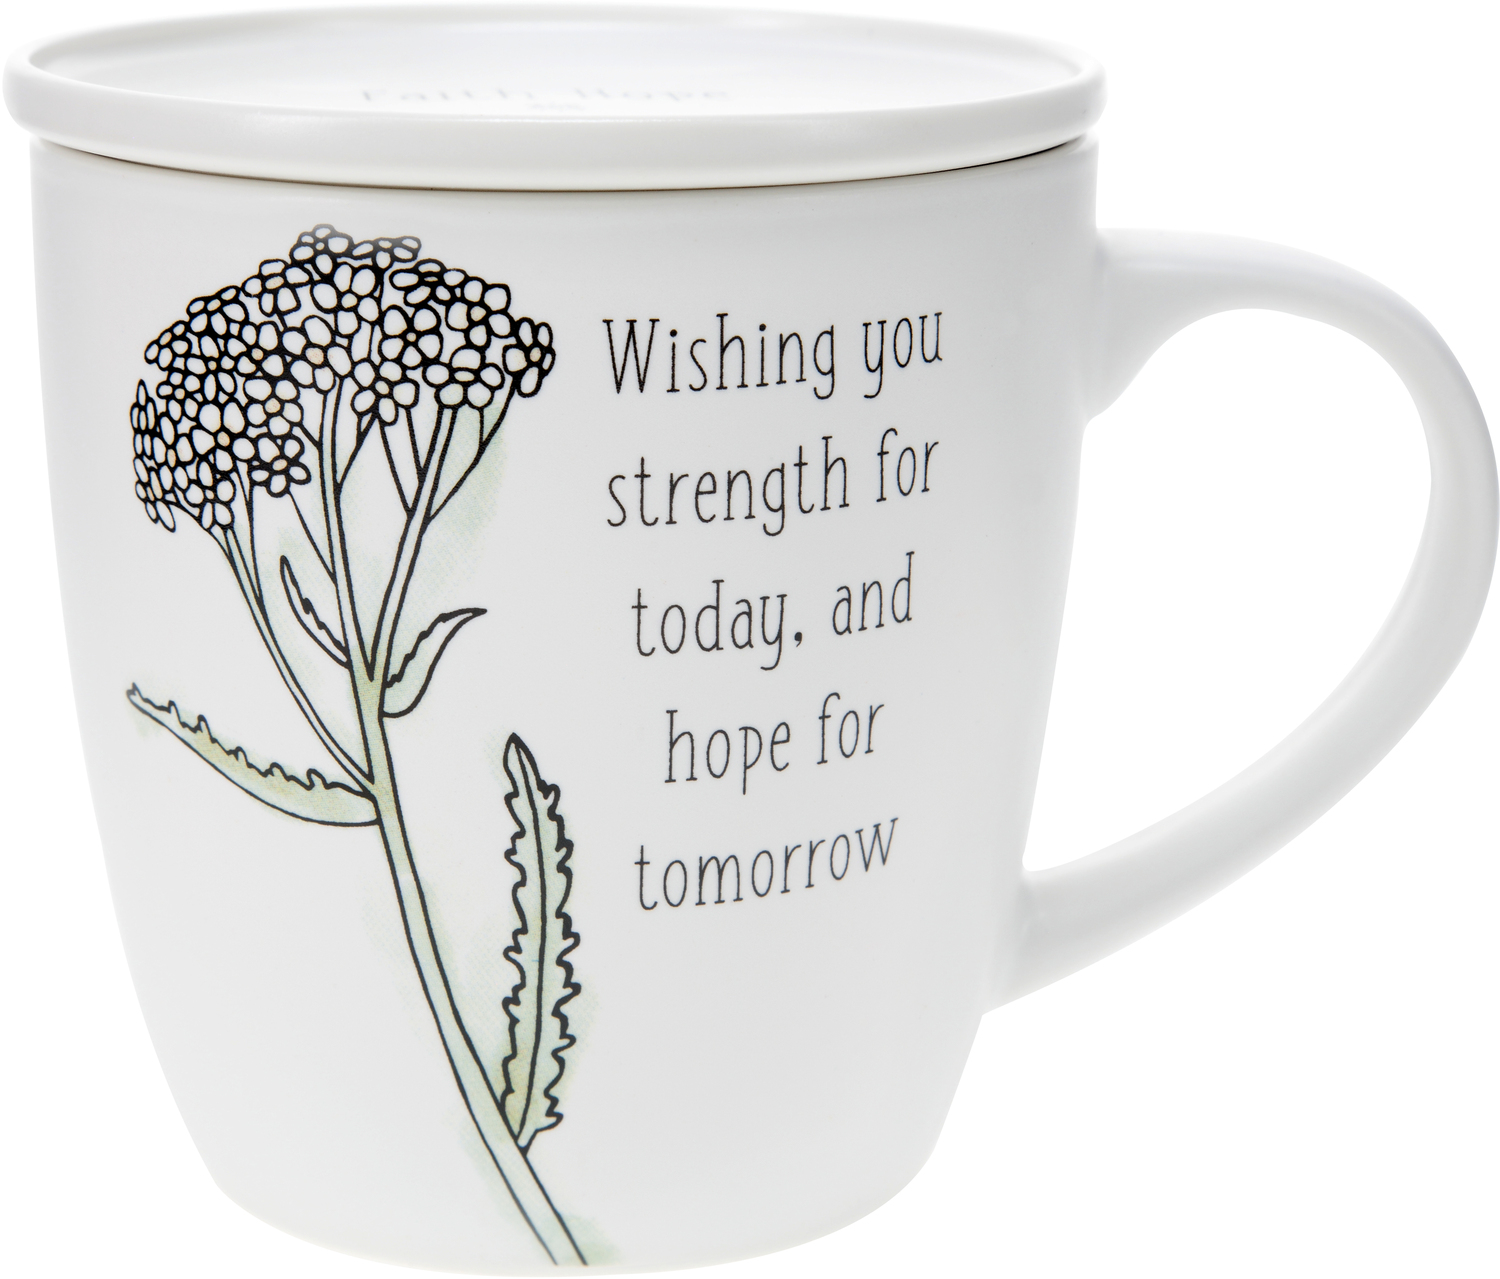 Strength for Today by Faith Hope and Healing - Strength for Today - 17 oz Cup with Coaster Lid